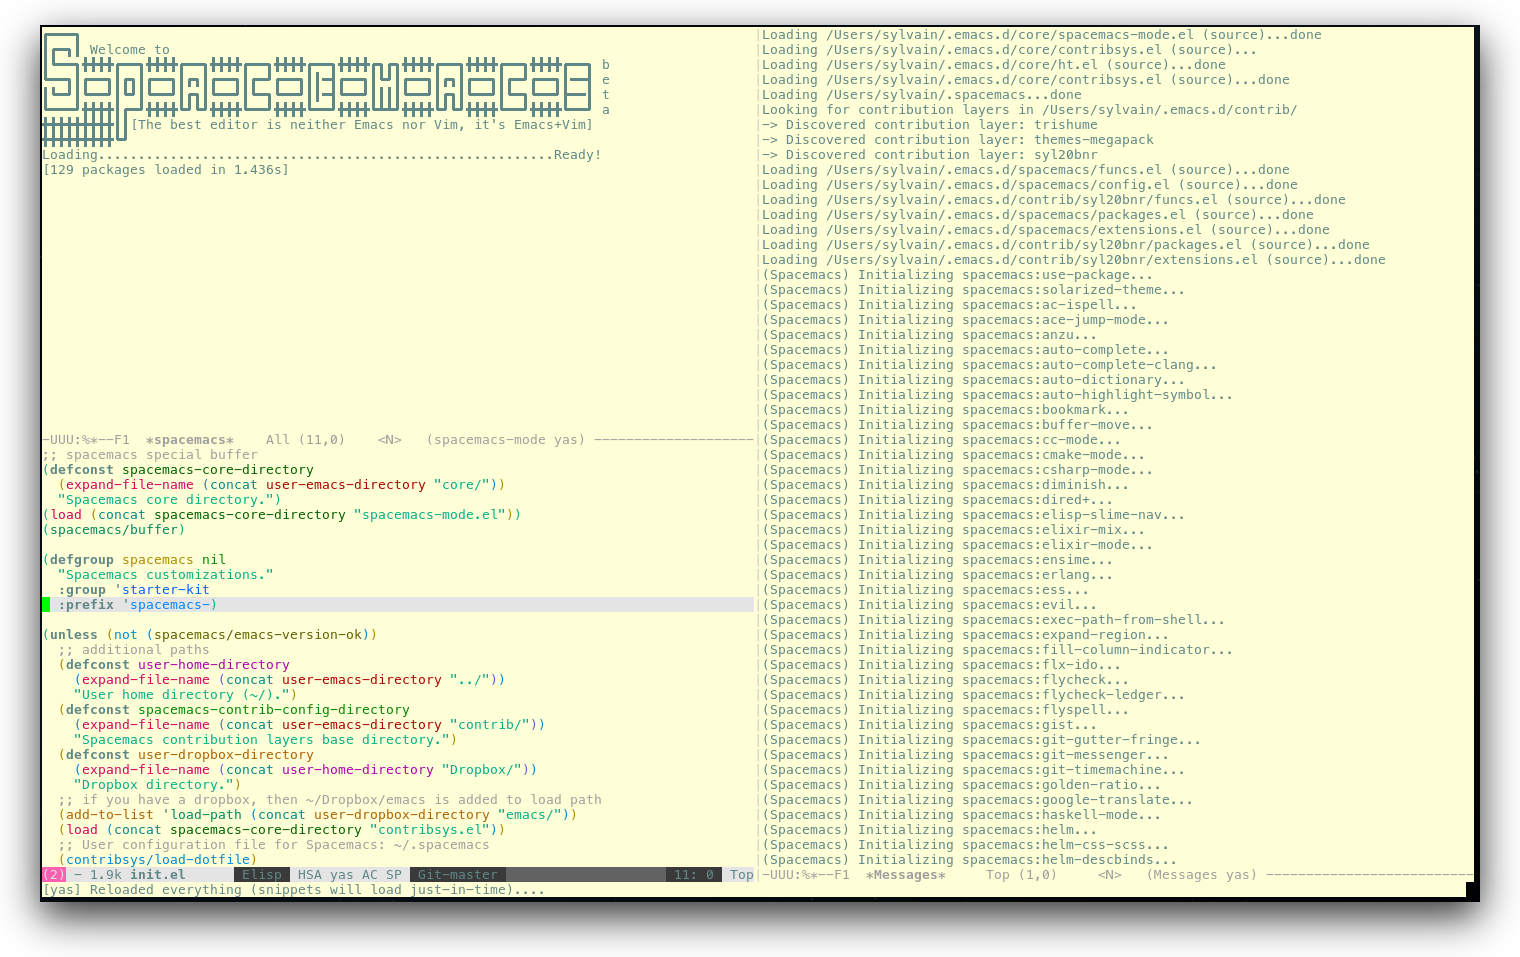 /TakeV/spacemacs/media/commit/6a18cad5c0e4ba896921c4659bffd9500d8d93b8/doc/img/spacemacs-urxvt.png